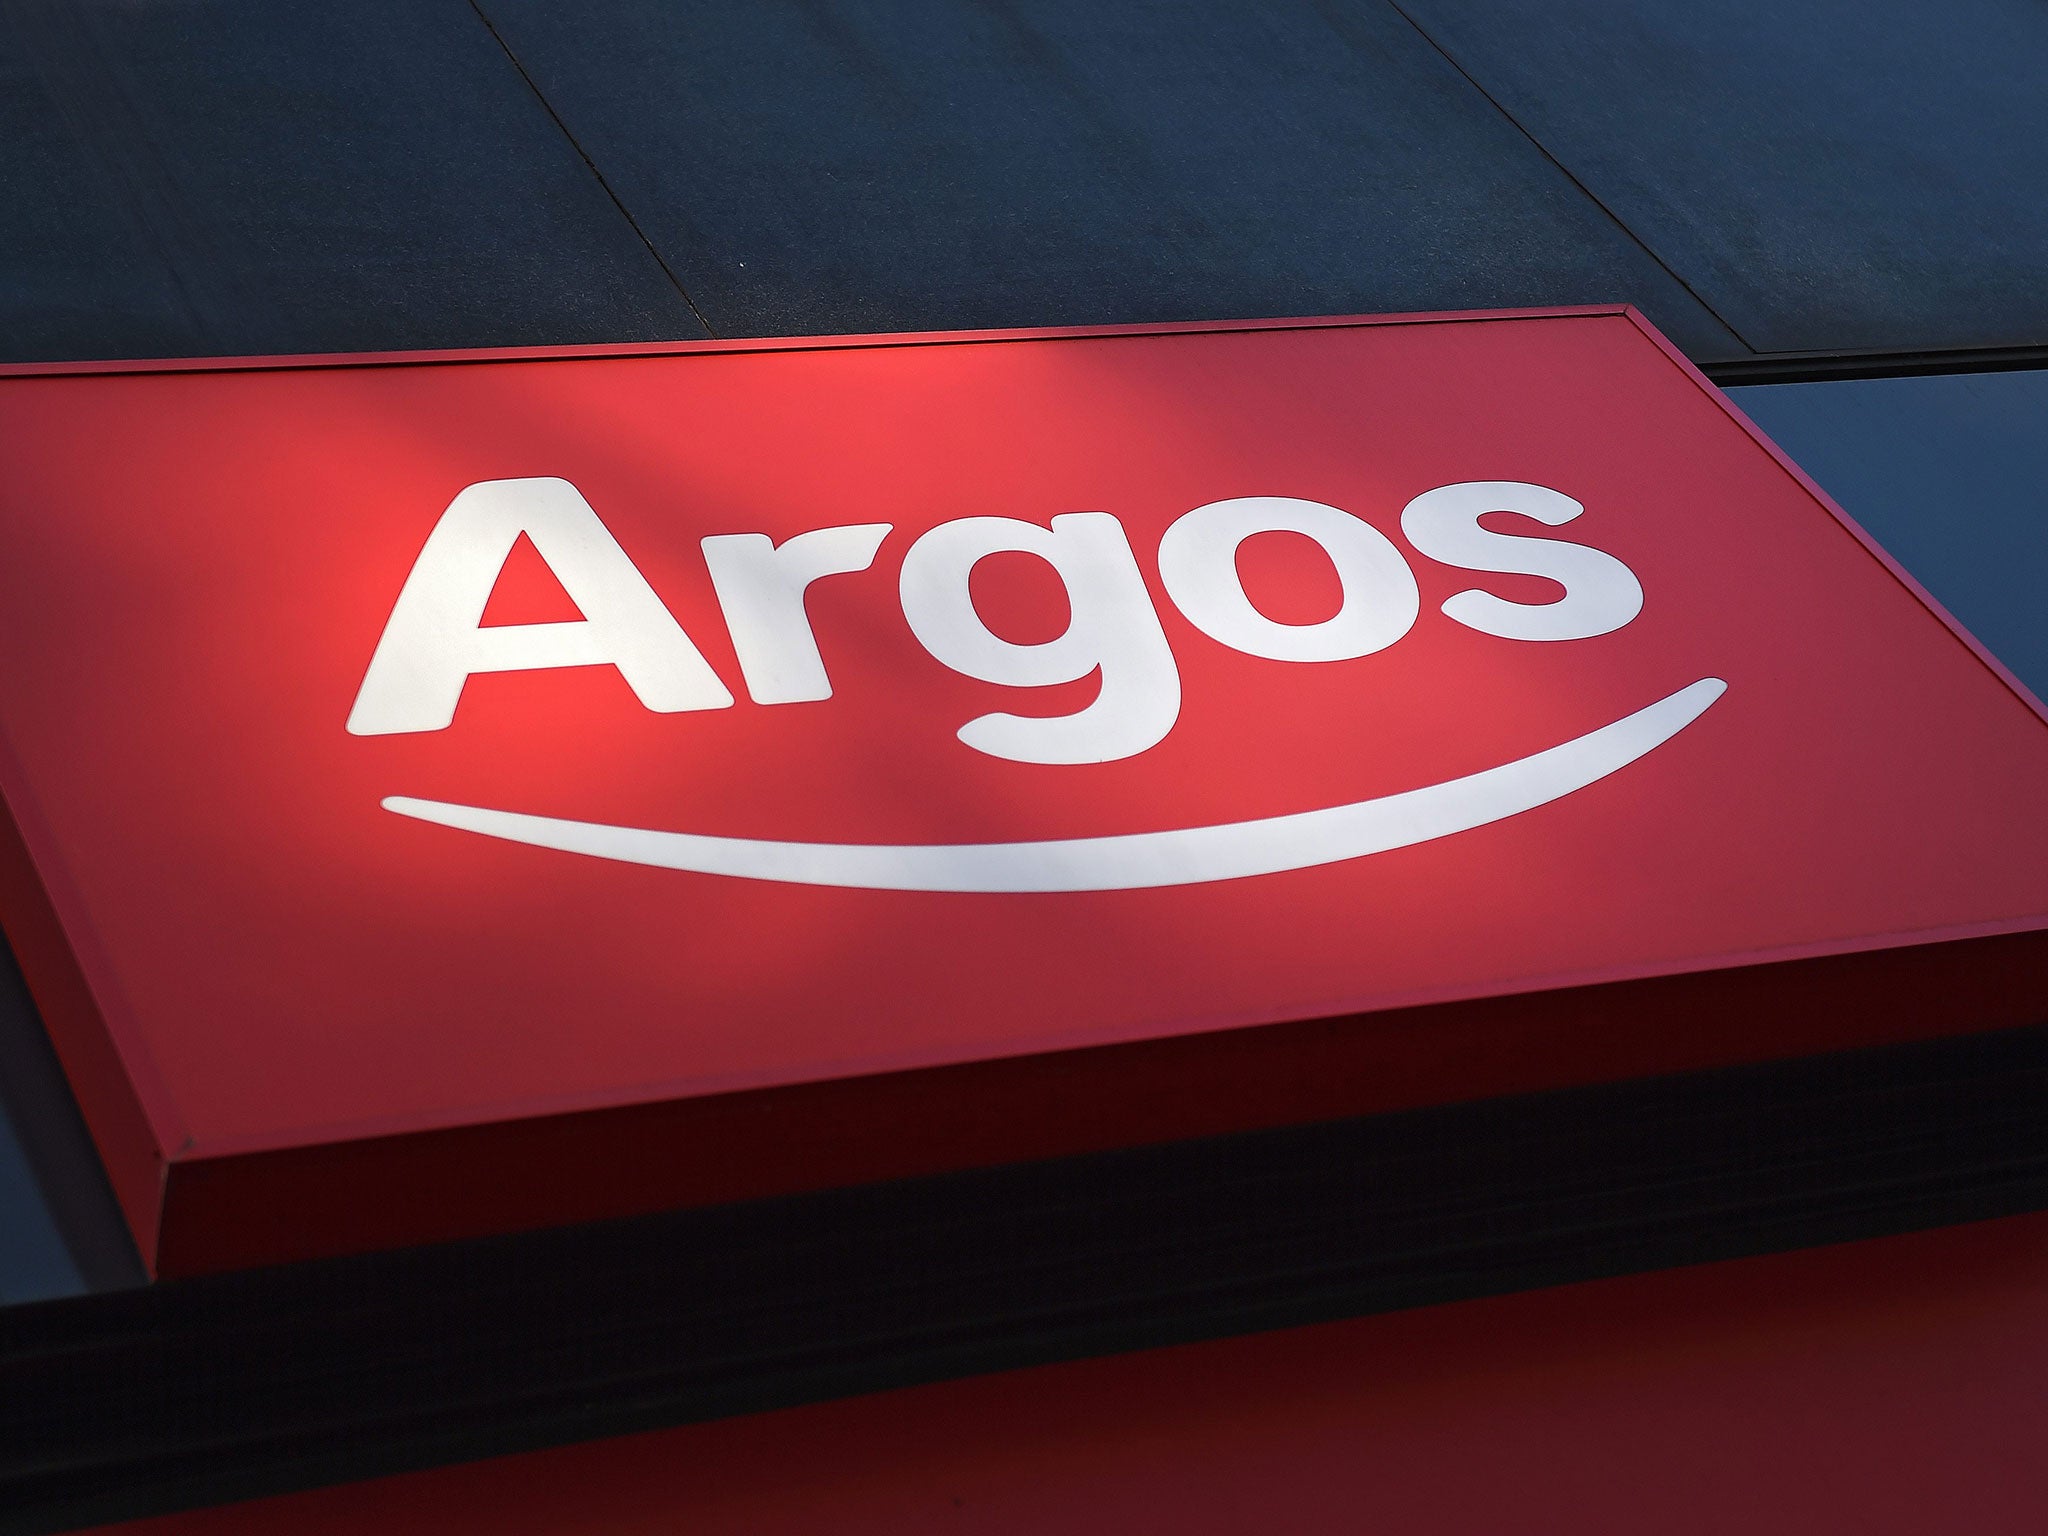 Group sales fell 1 per cent to £5.67 billion. They were flat at Argos and down 3 per cent at home improvement retailer Homebase